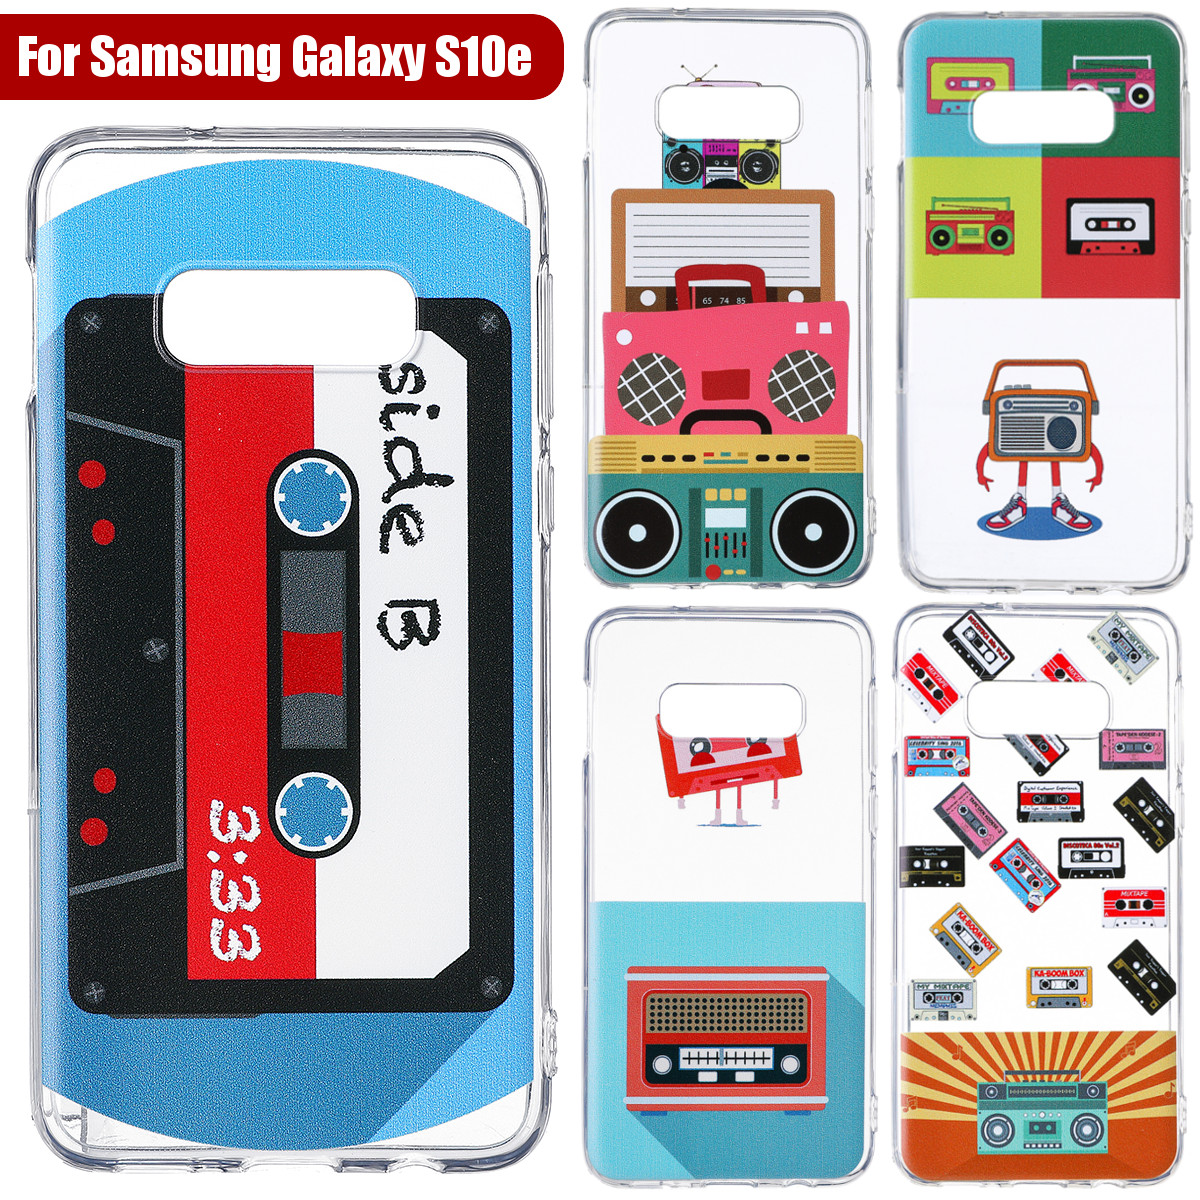 Bakeey-Cartoon-Matte-Transparent-Soft-TPU-Shockproof-Protective-Case-Cover-for-Samsung-Galaxy-S10e-1634633-2